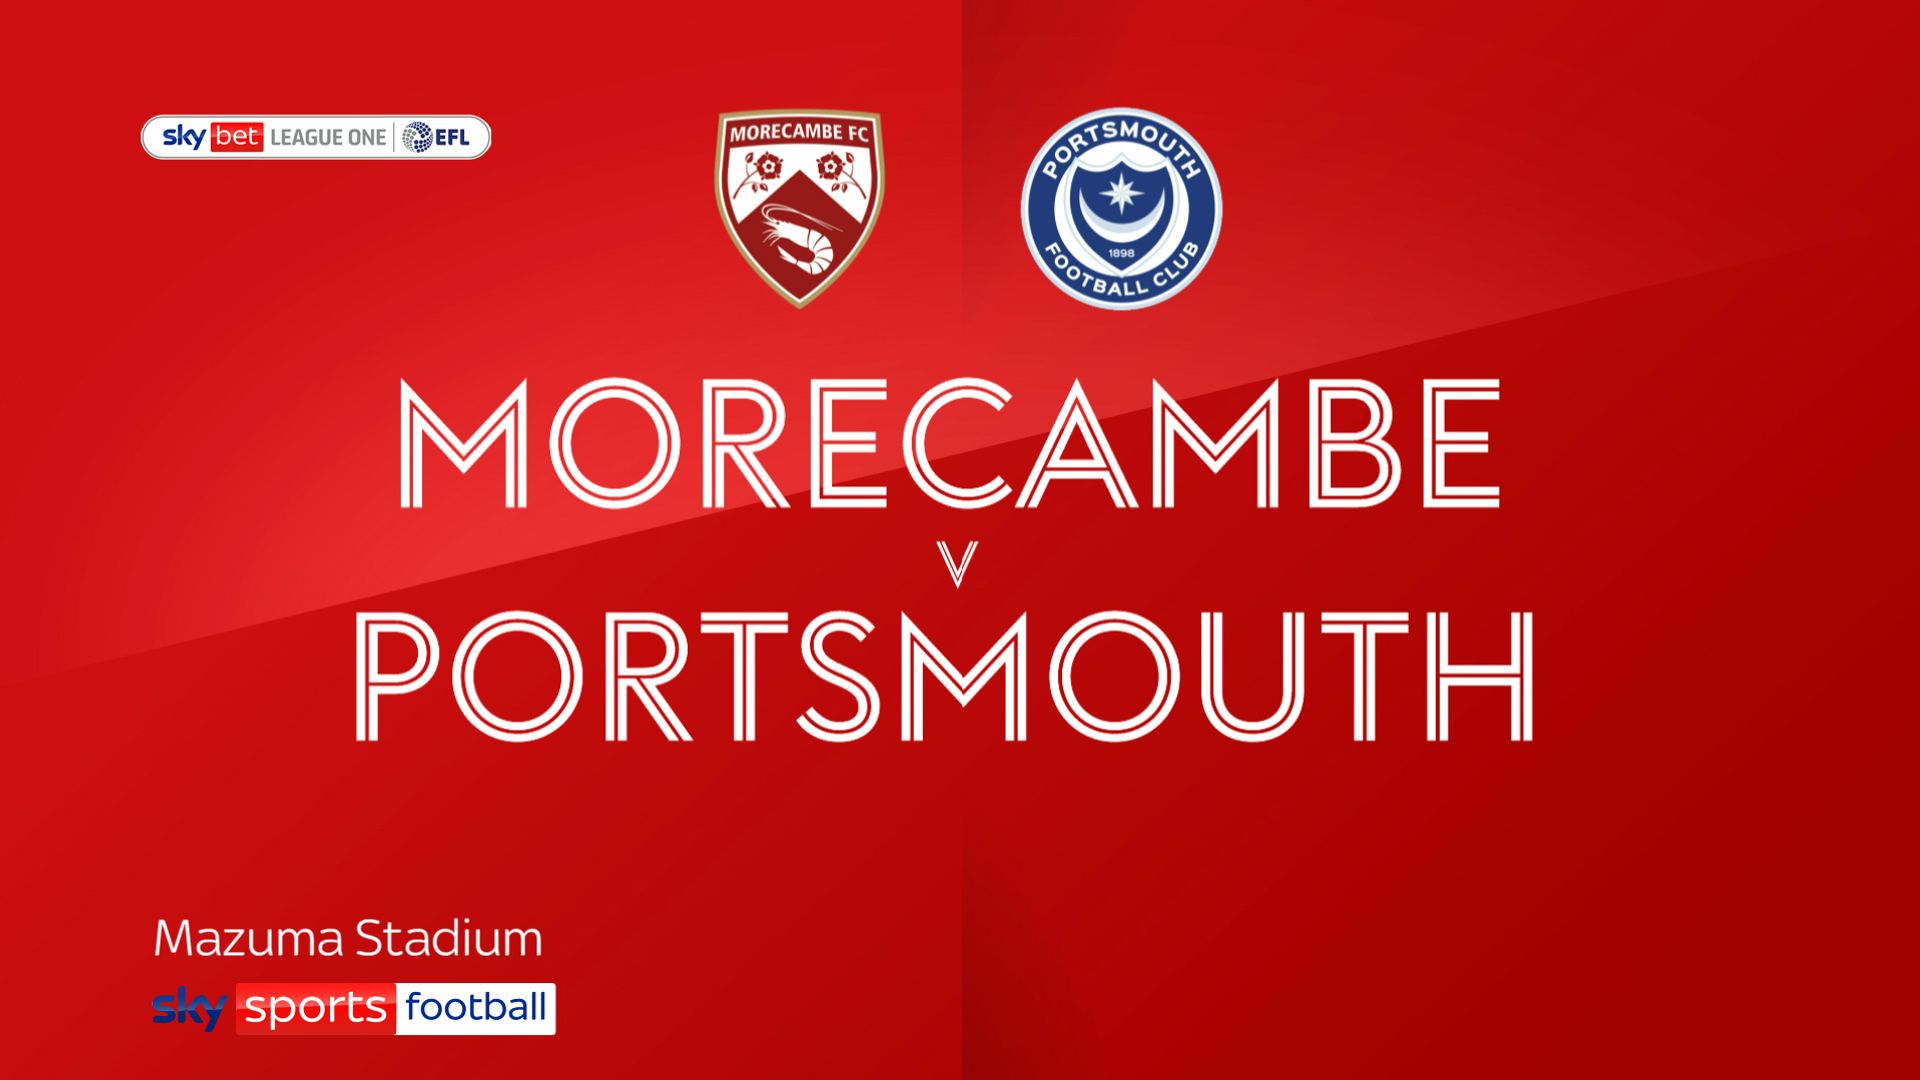 Morecambe 1-1 Portsmouth: Shrimps dominate but cannot hold on for victory against Pompey